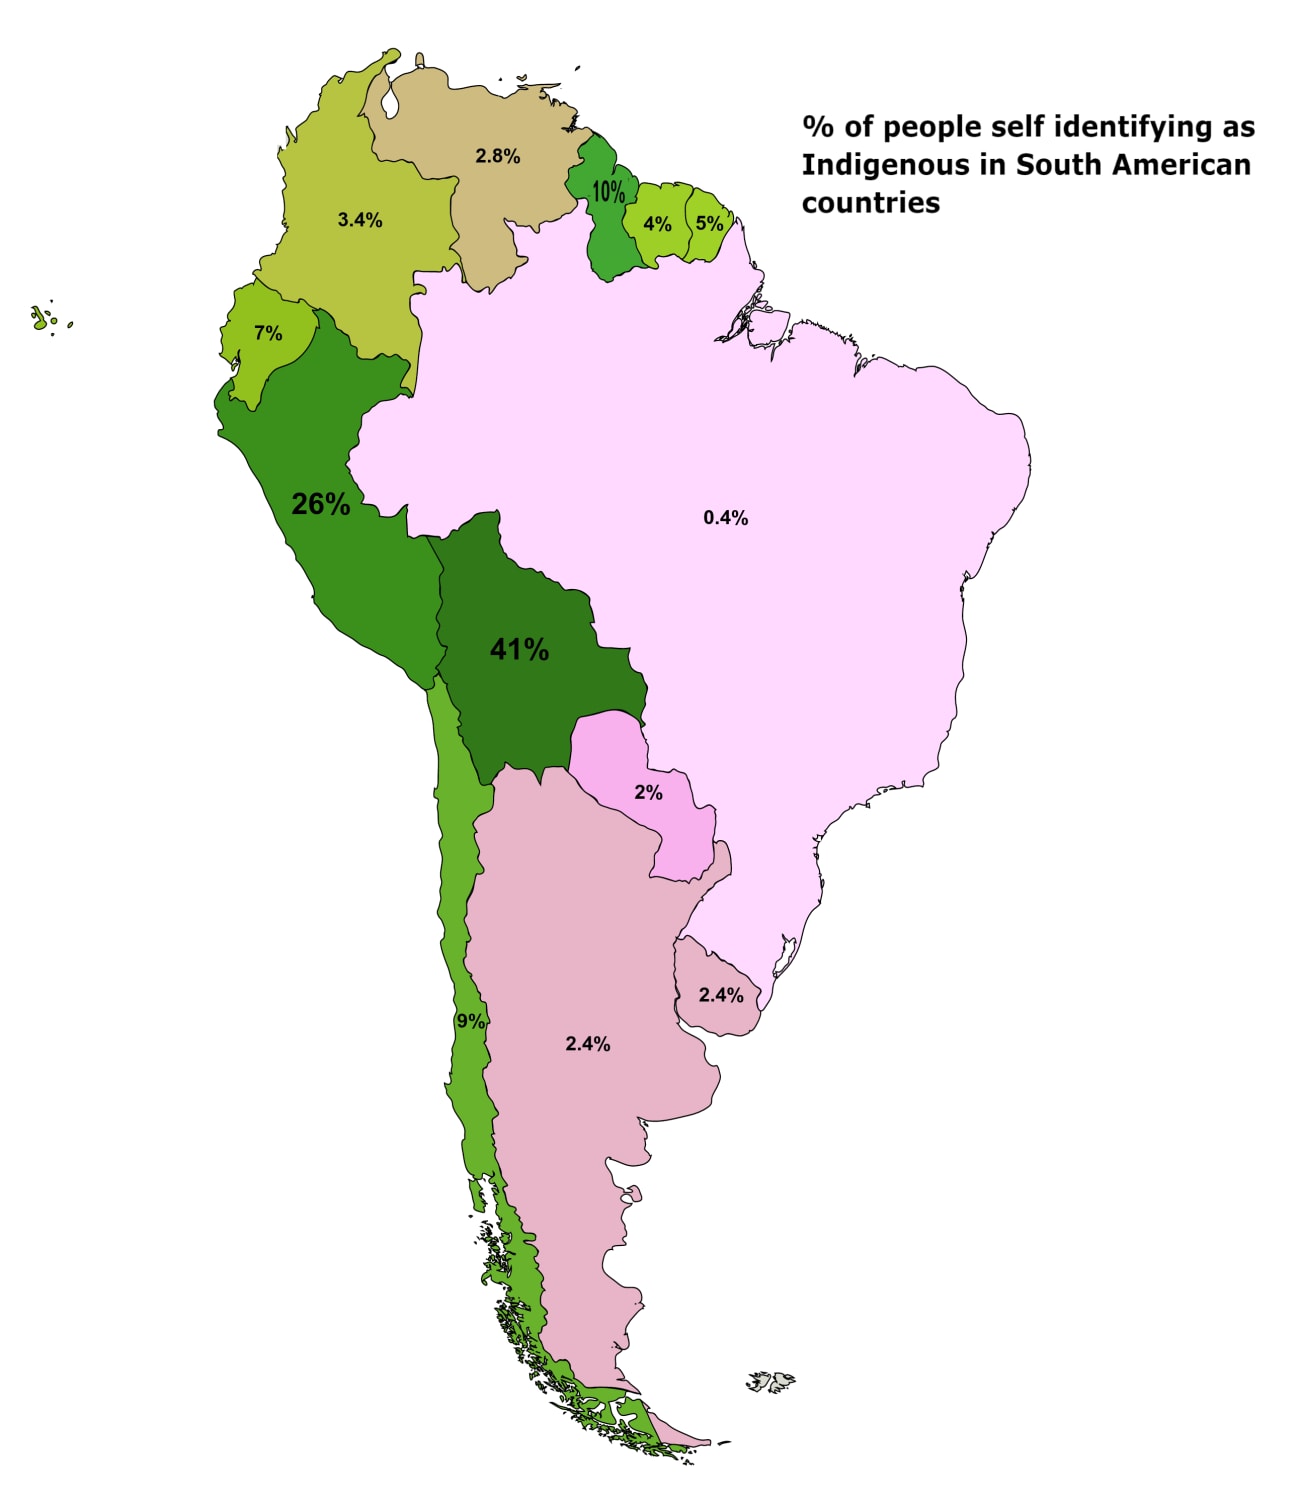 Percentage of people self identifying as Indigenous in South American countries